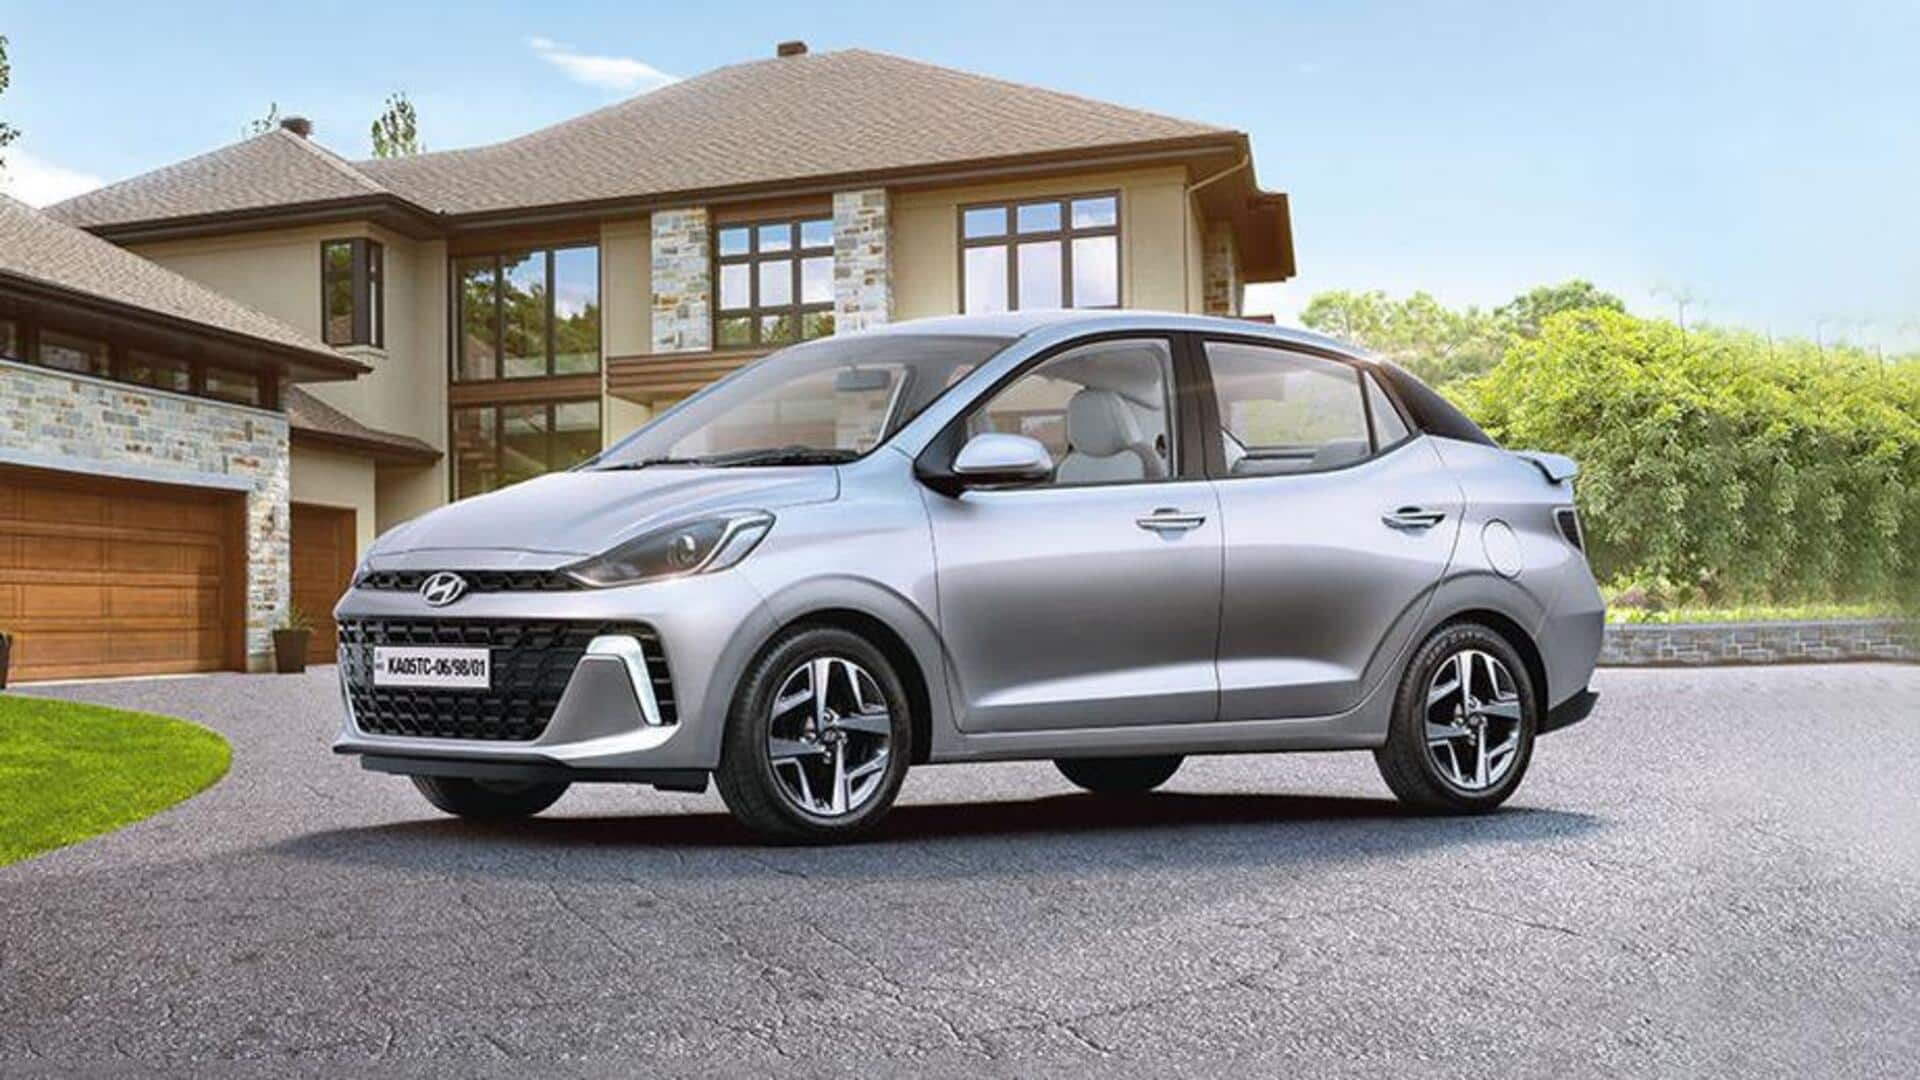 Hyundai AURA becomes costlier in India: Check new prices